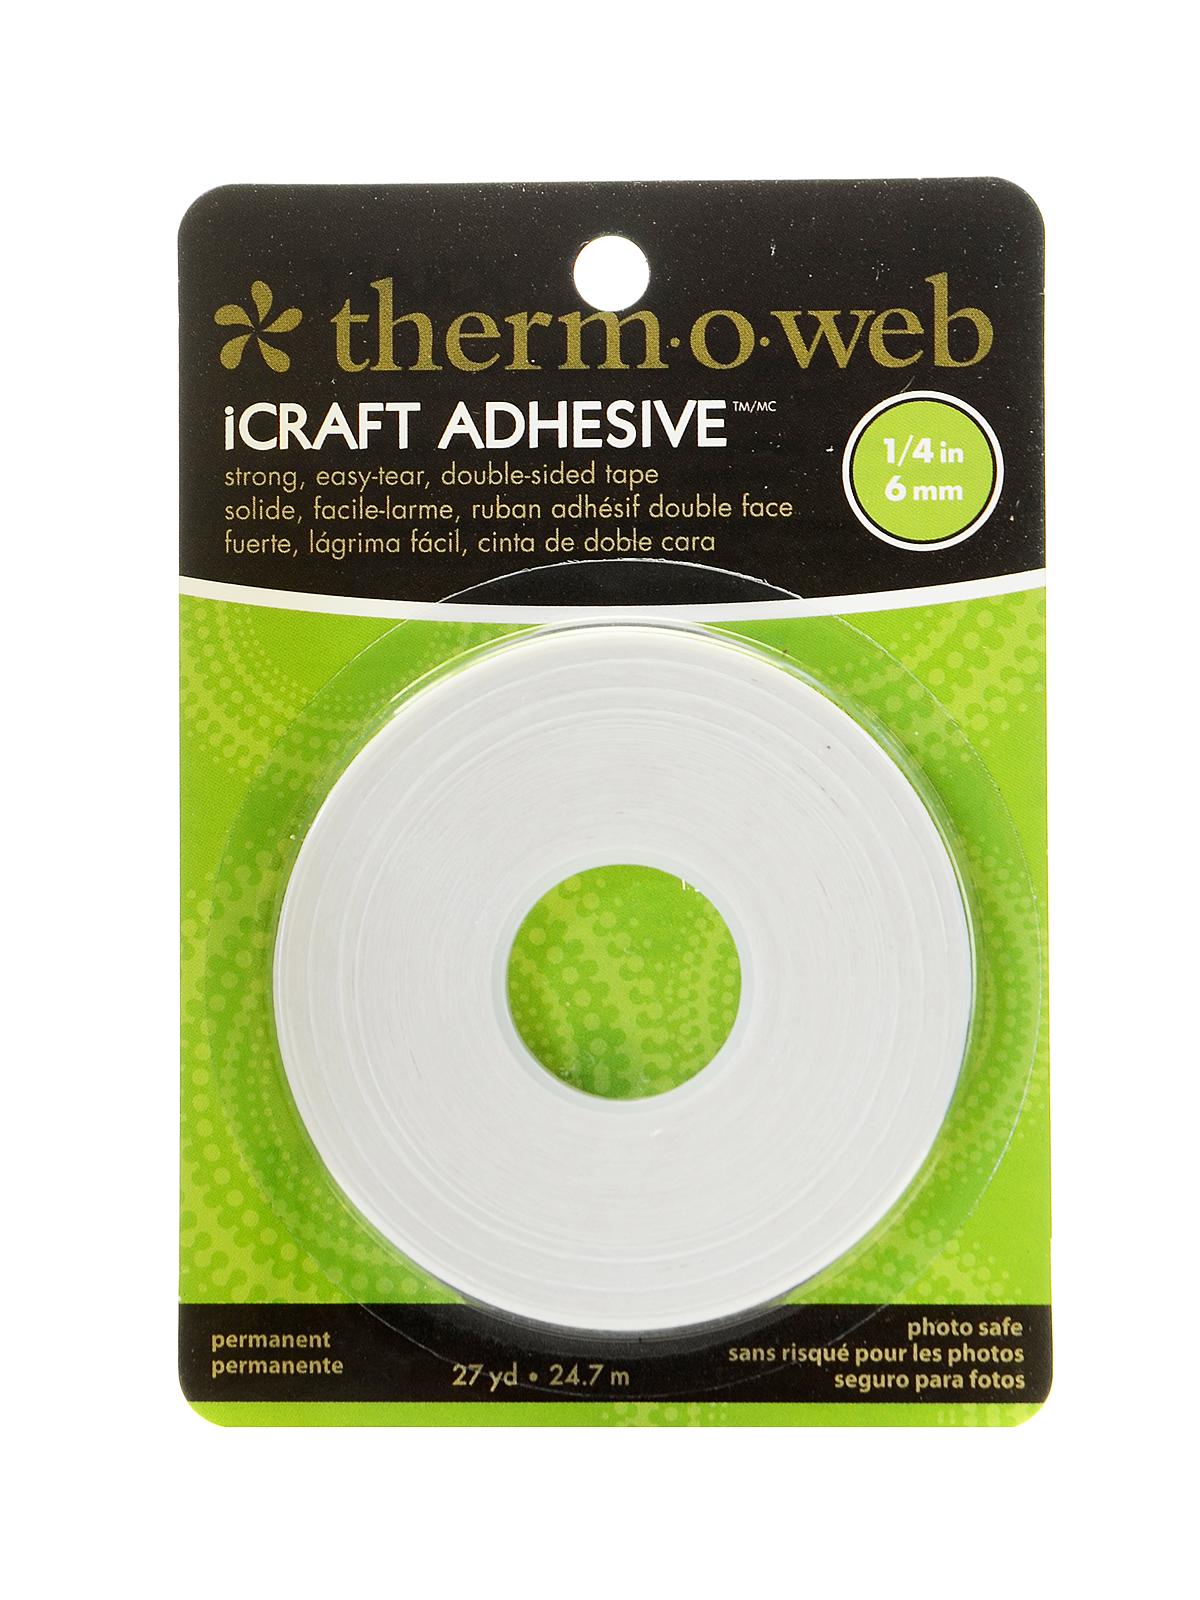 Icraft Easy-tear Double-sided Tape 1 4 In. X 25 Yd. Roll